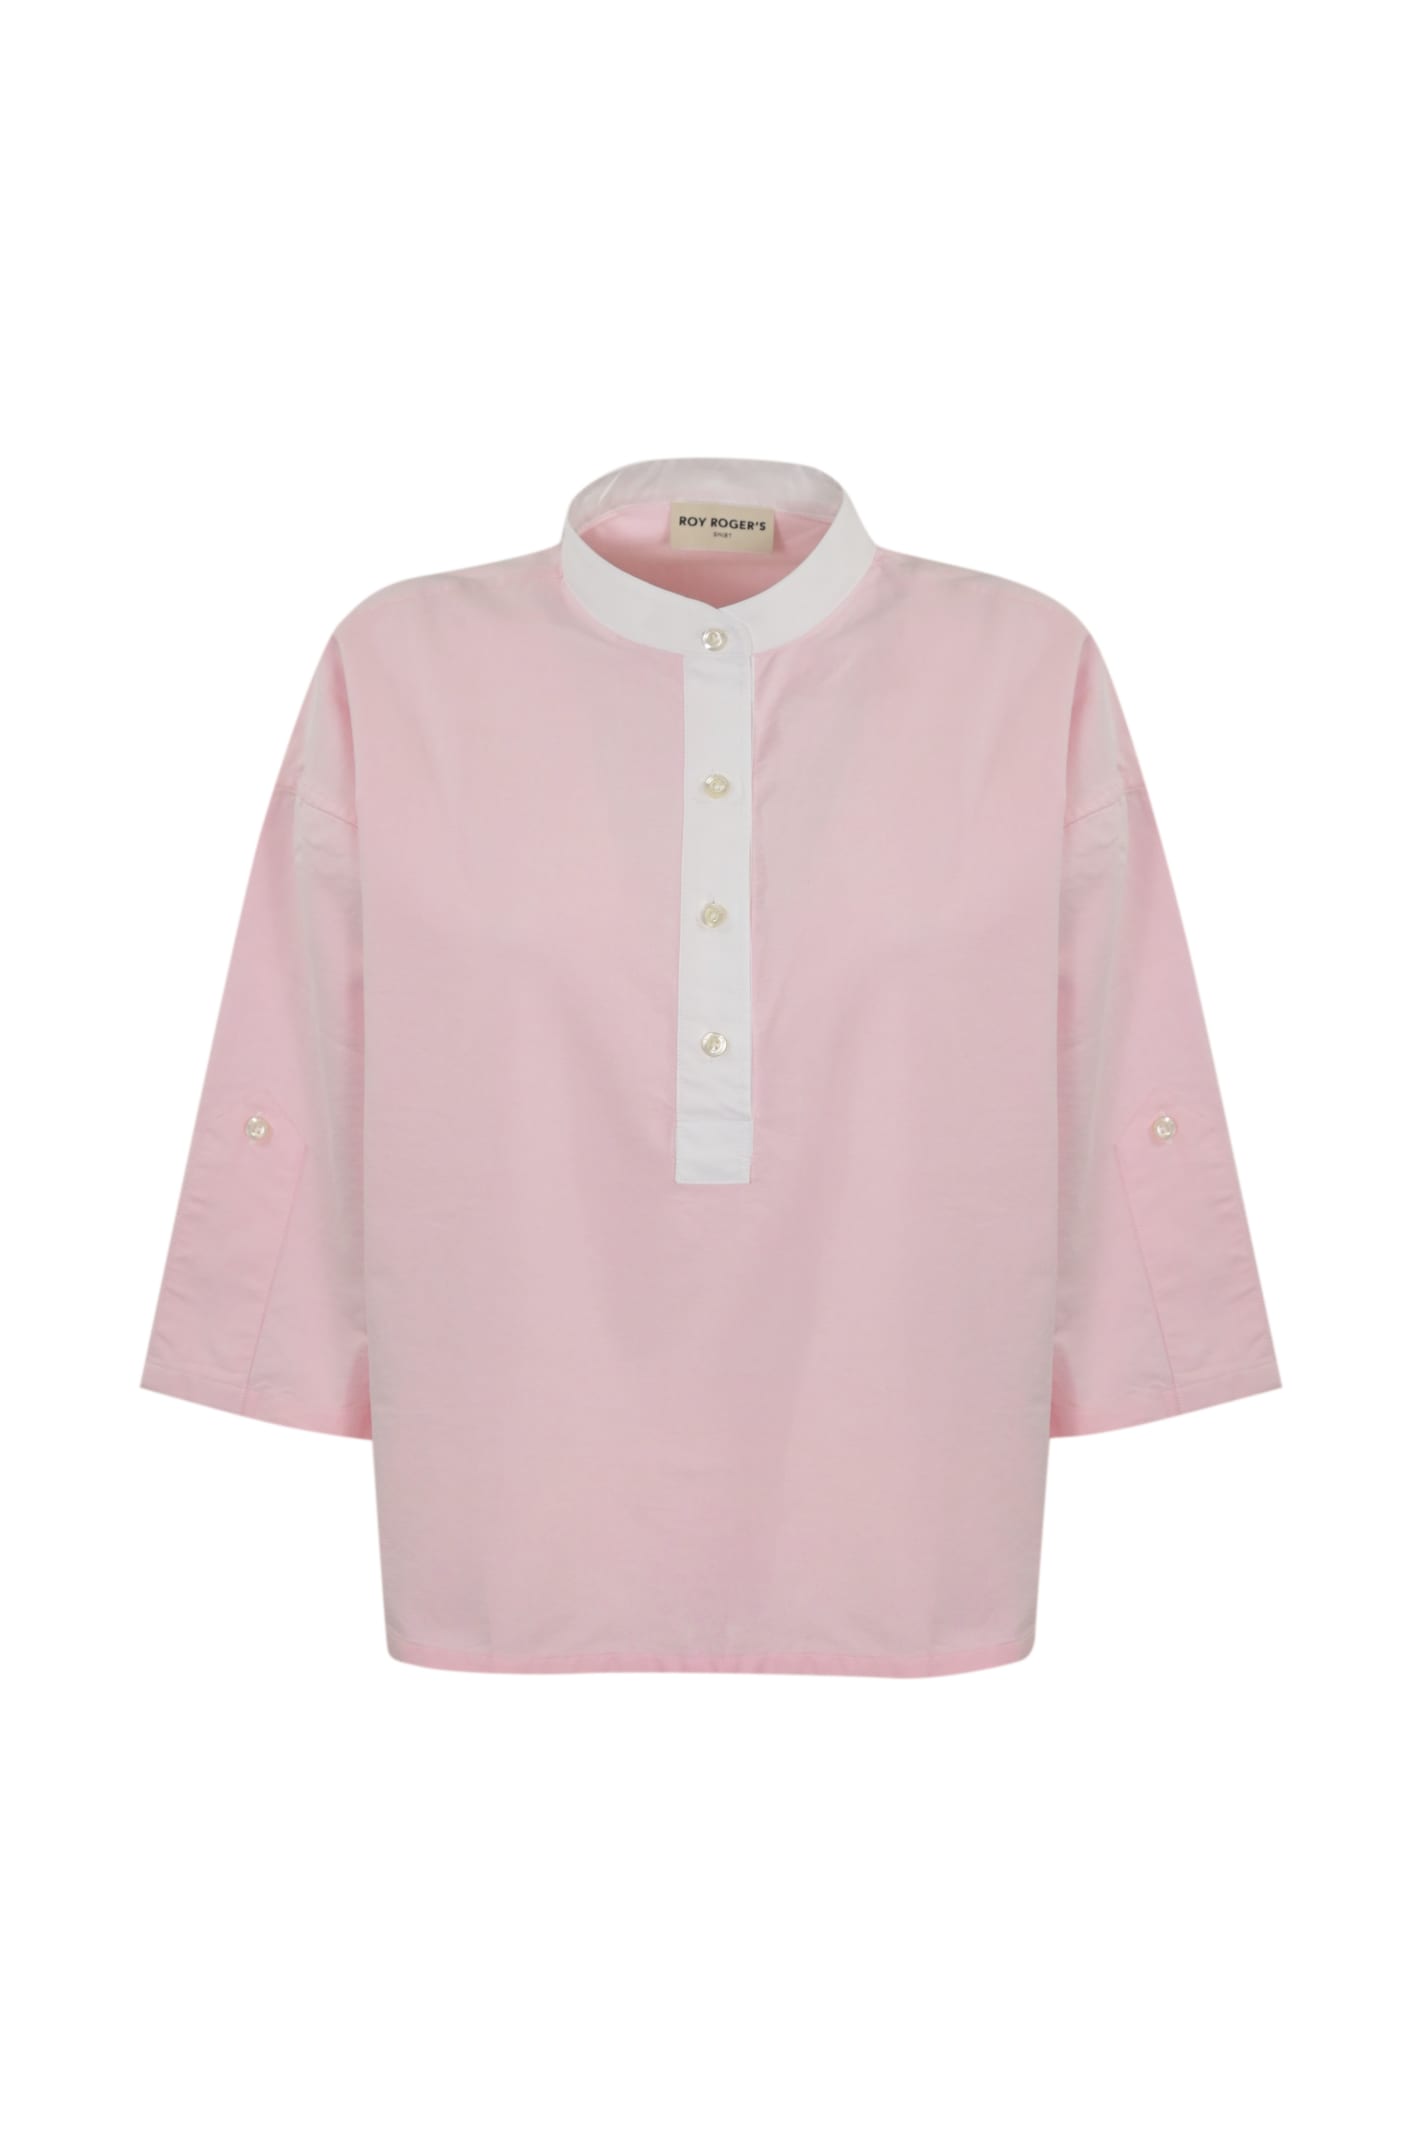 Roy Rogers Mandarin Collar Shirt In Washed Pink